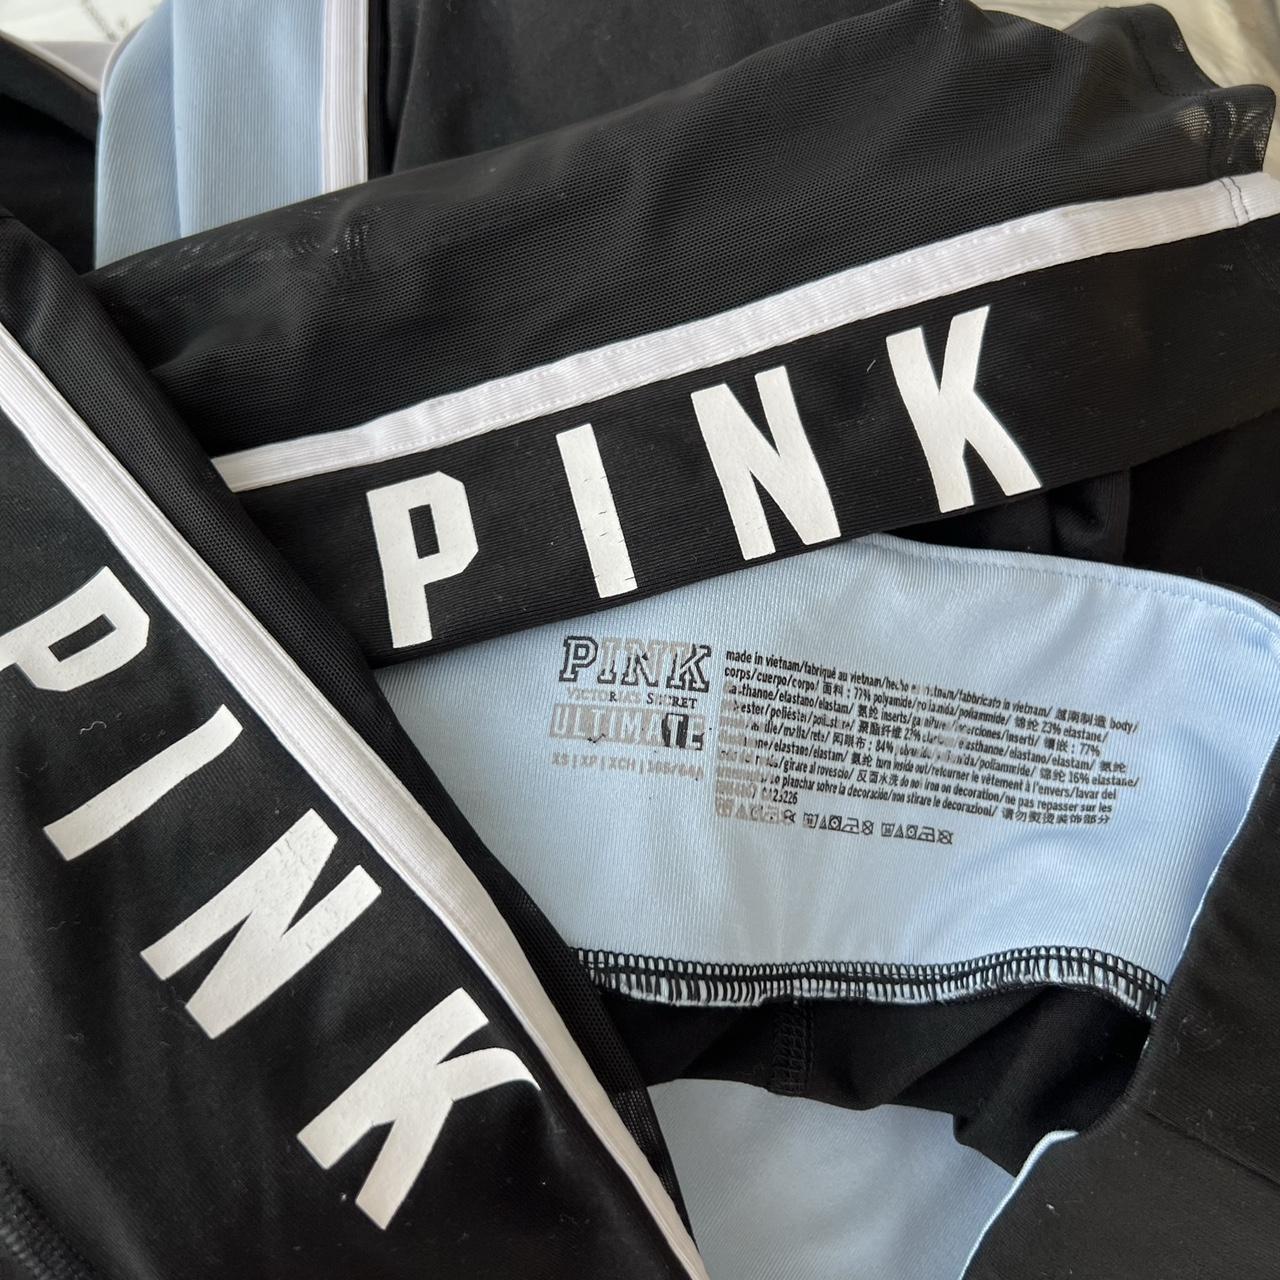 Victoria's Secret PINK - The Ultimate Legging for ultimate vibes